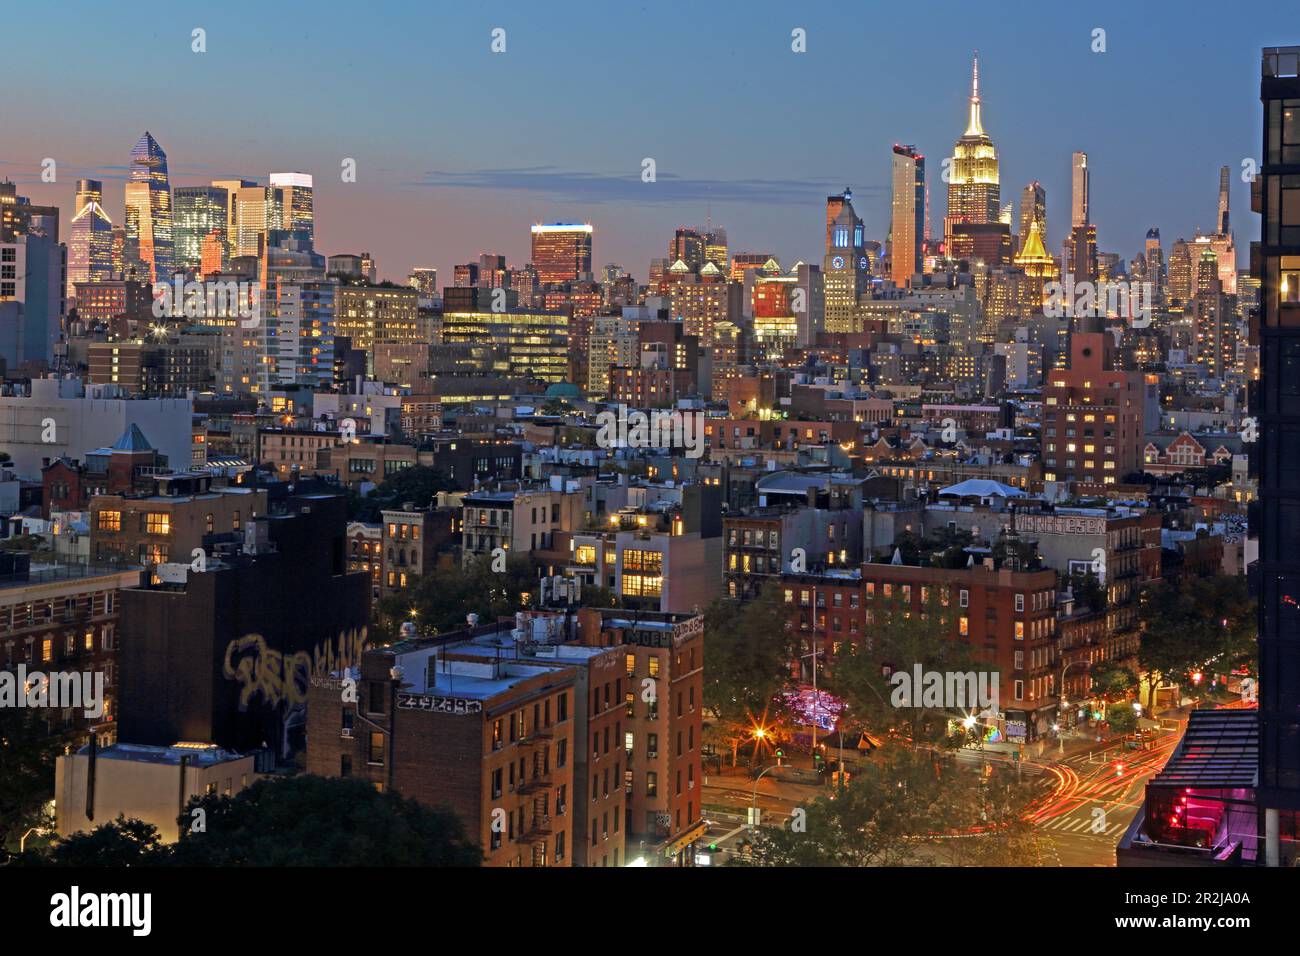 View from the Lower East Side of Bowery Street, the Midtown skyline with the Hudson Yards (left) and the Empire State Building, Manhattan, New York, N Stock Photo